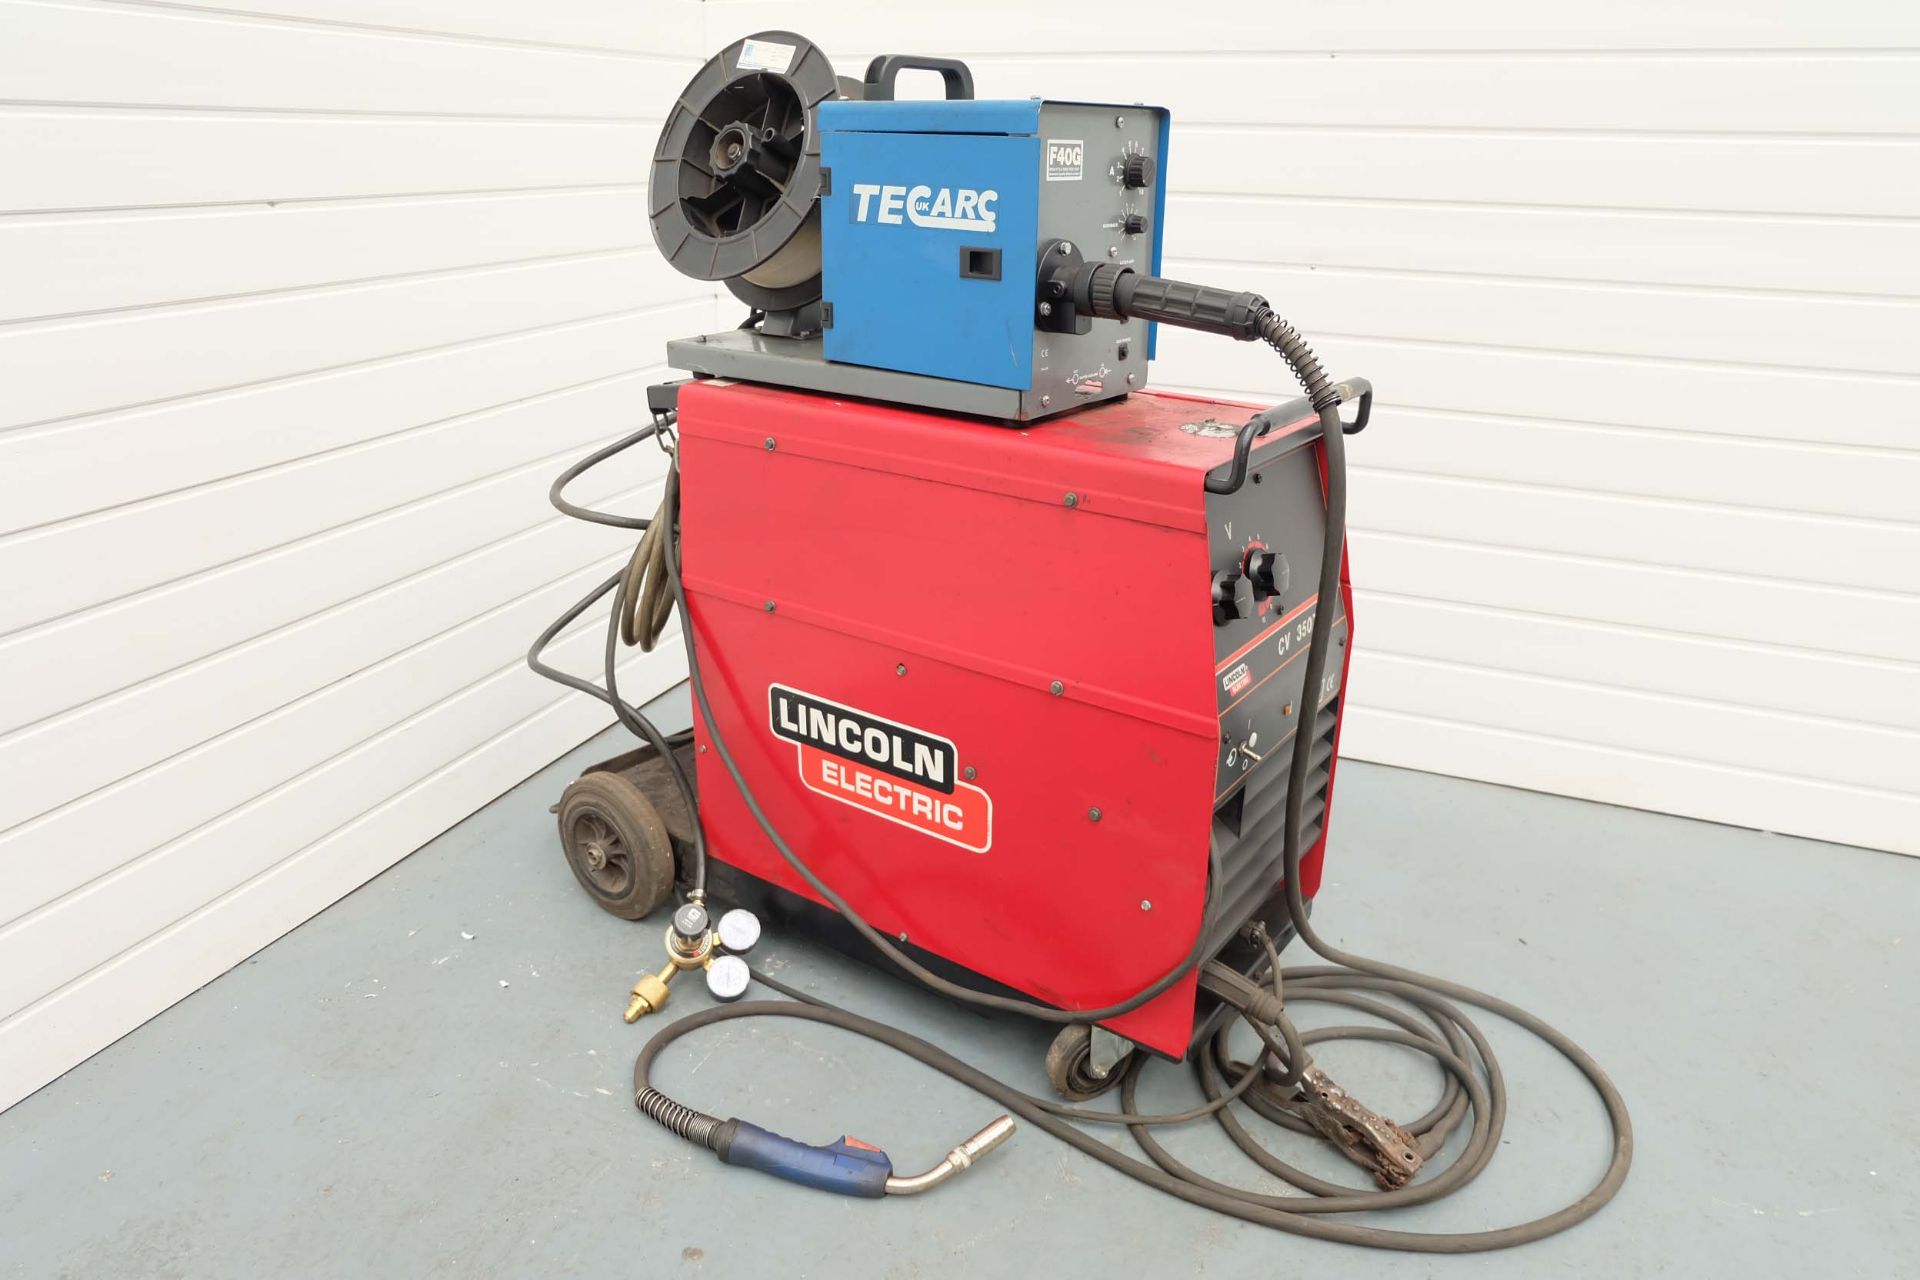 Lincoln Electric CV 350T Mig Welding Set On Wheels.